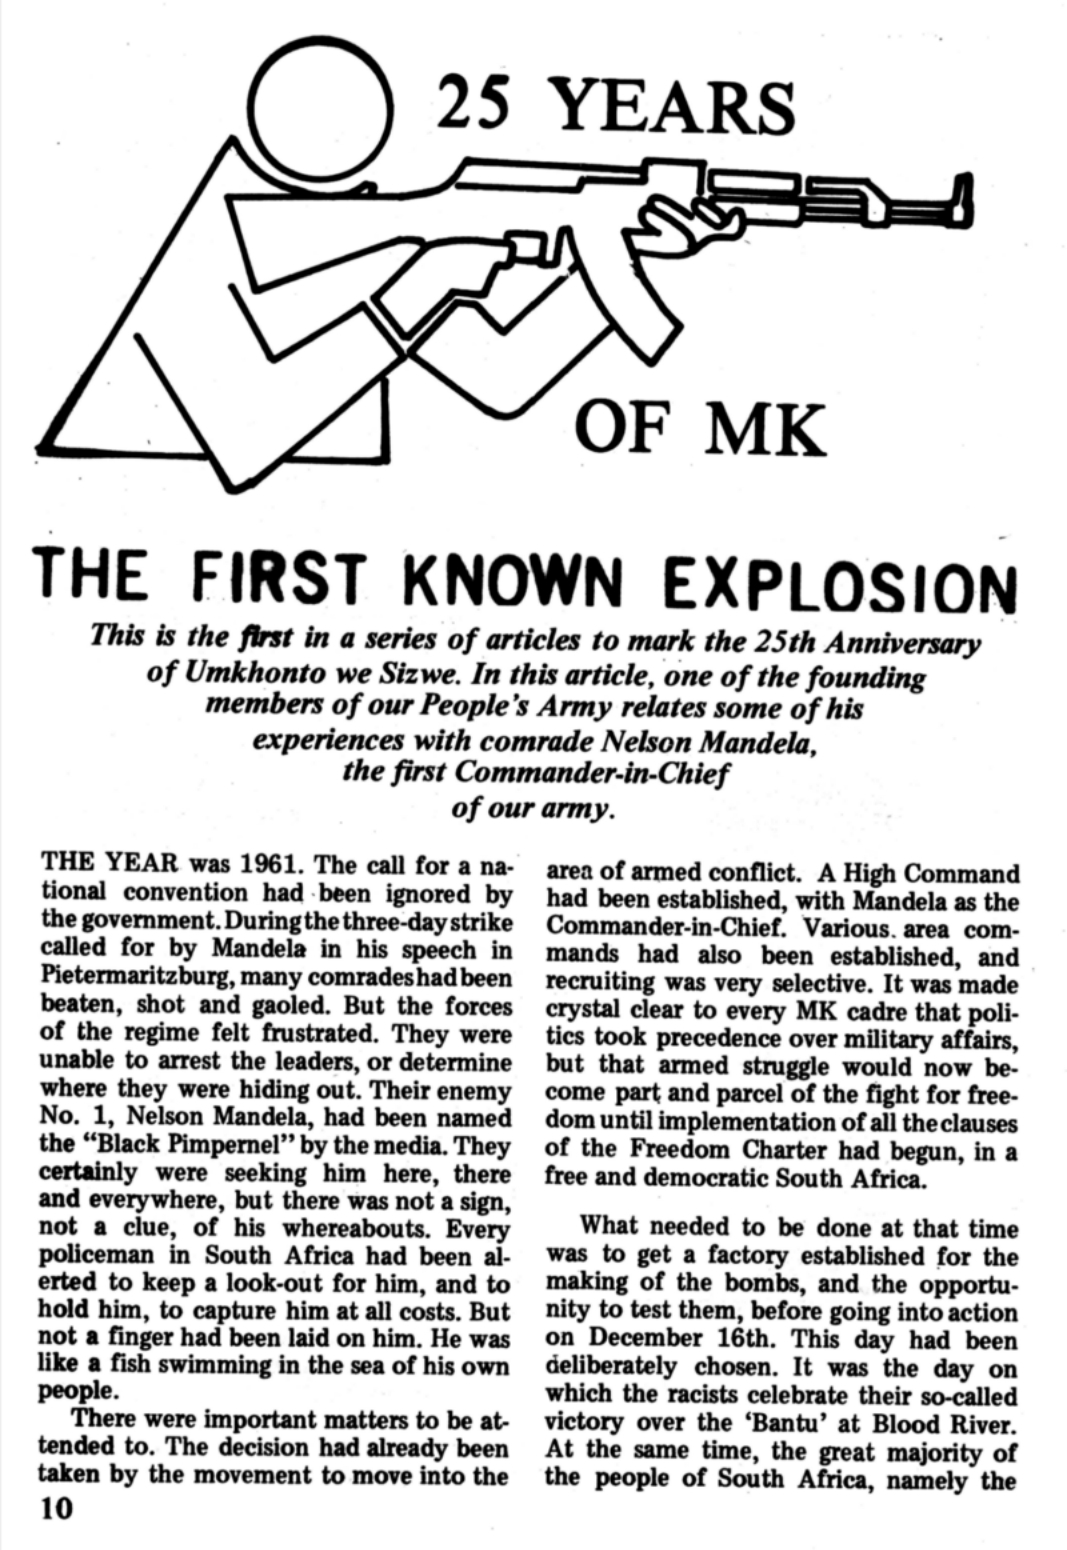 Excerpt from Dawn, article titled The First Known Explosion